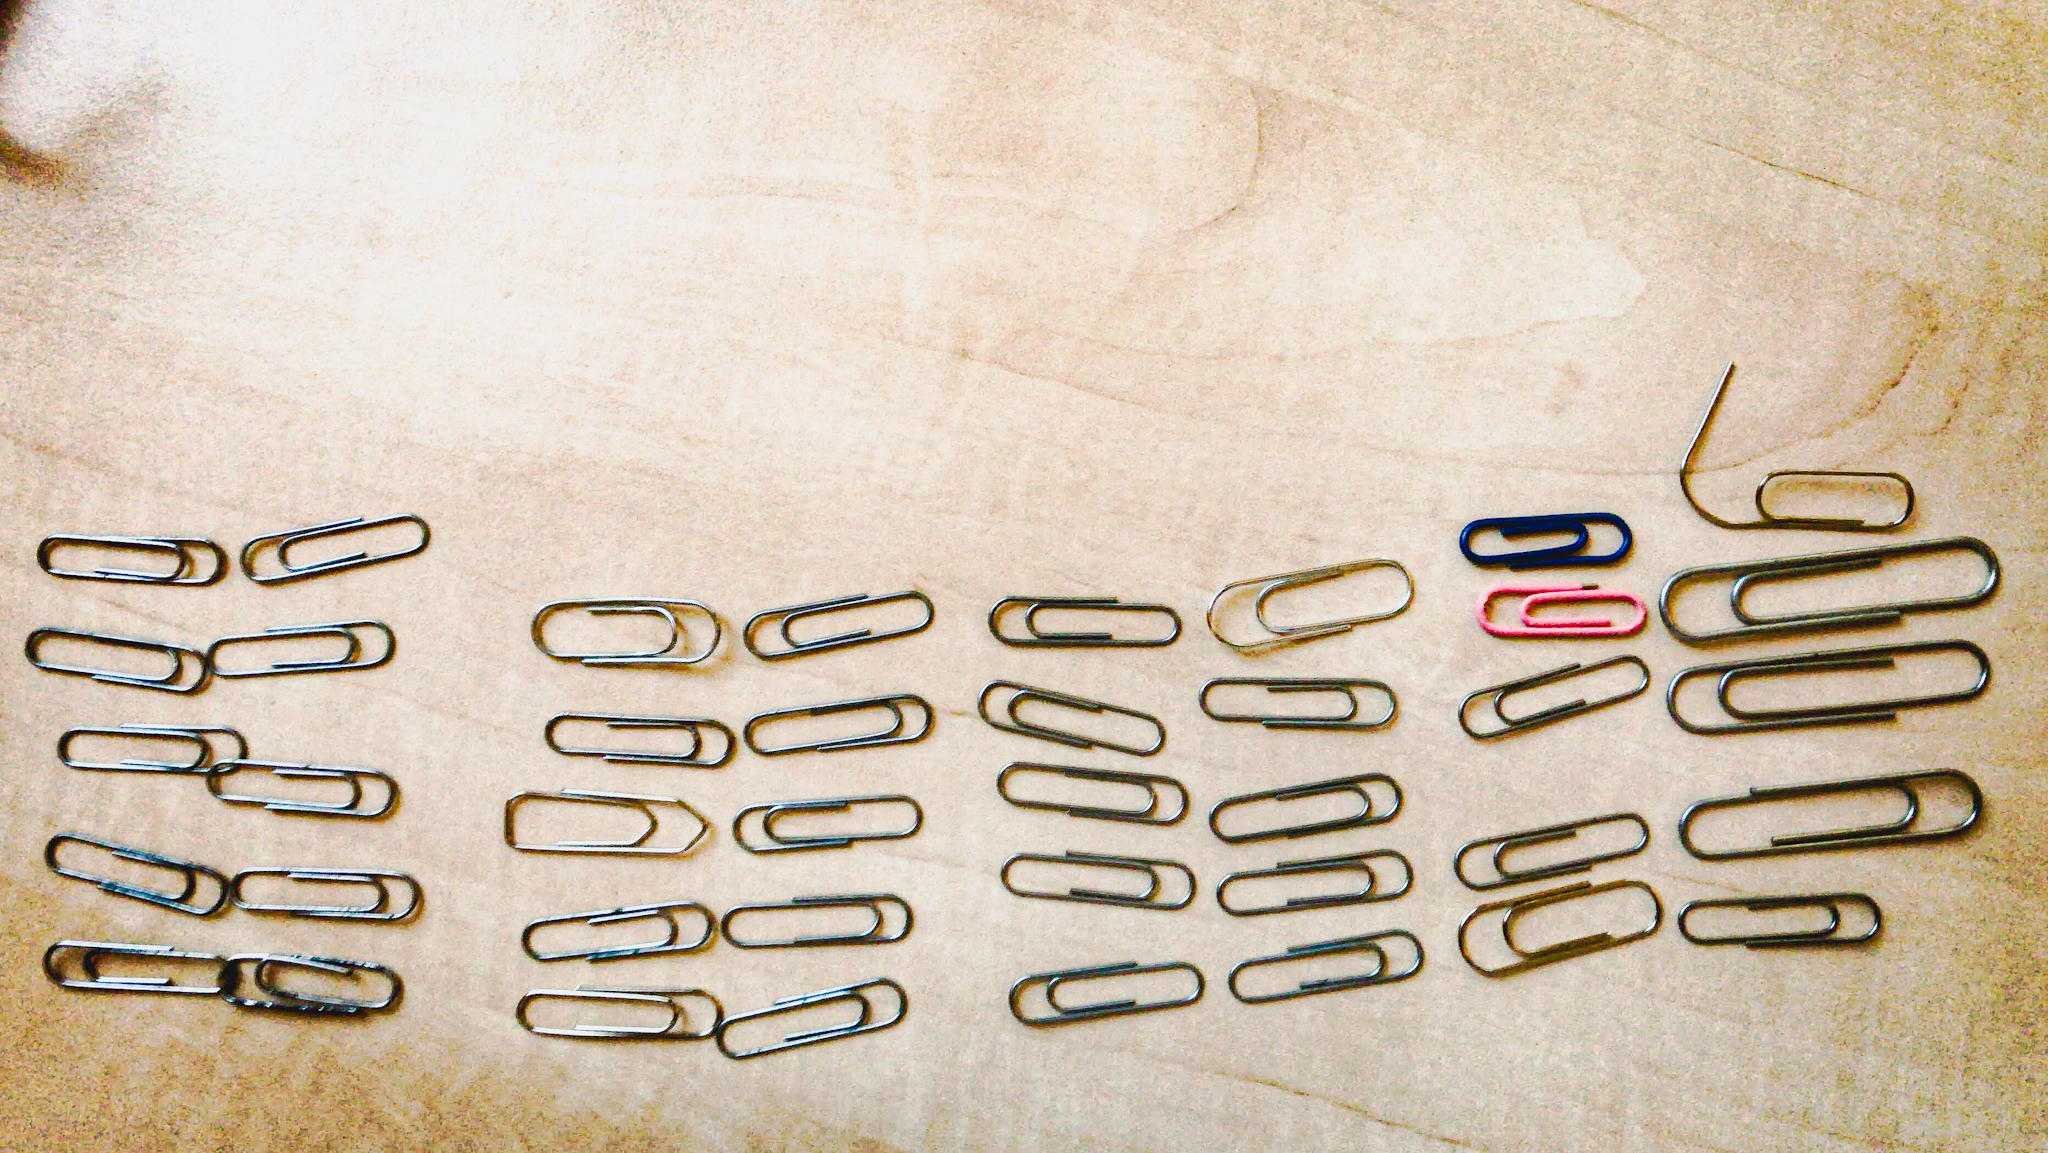 The Day I Counted Paperclips